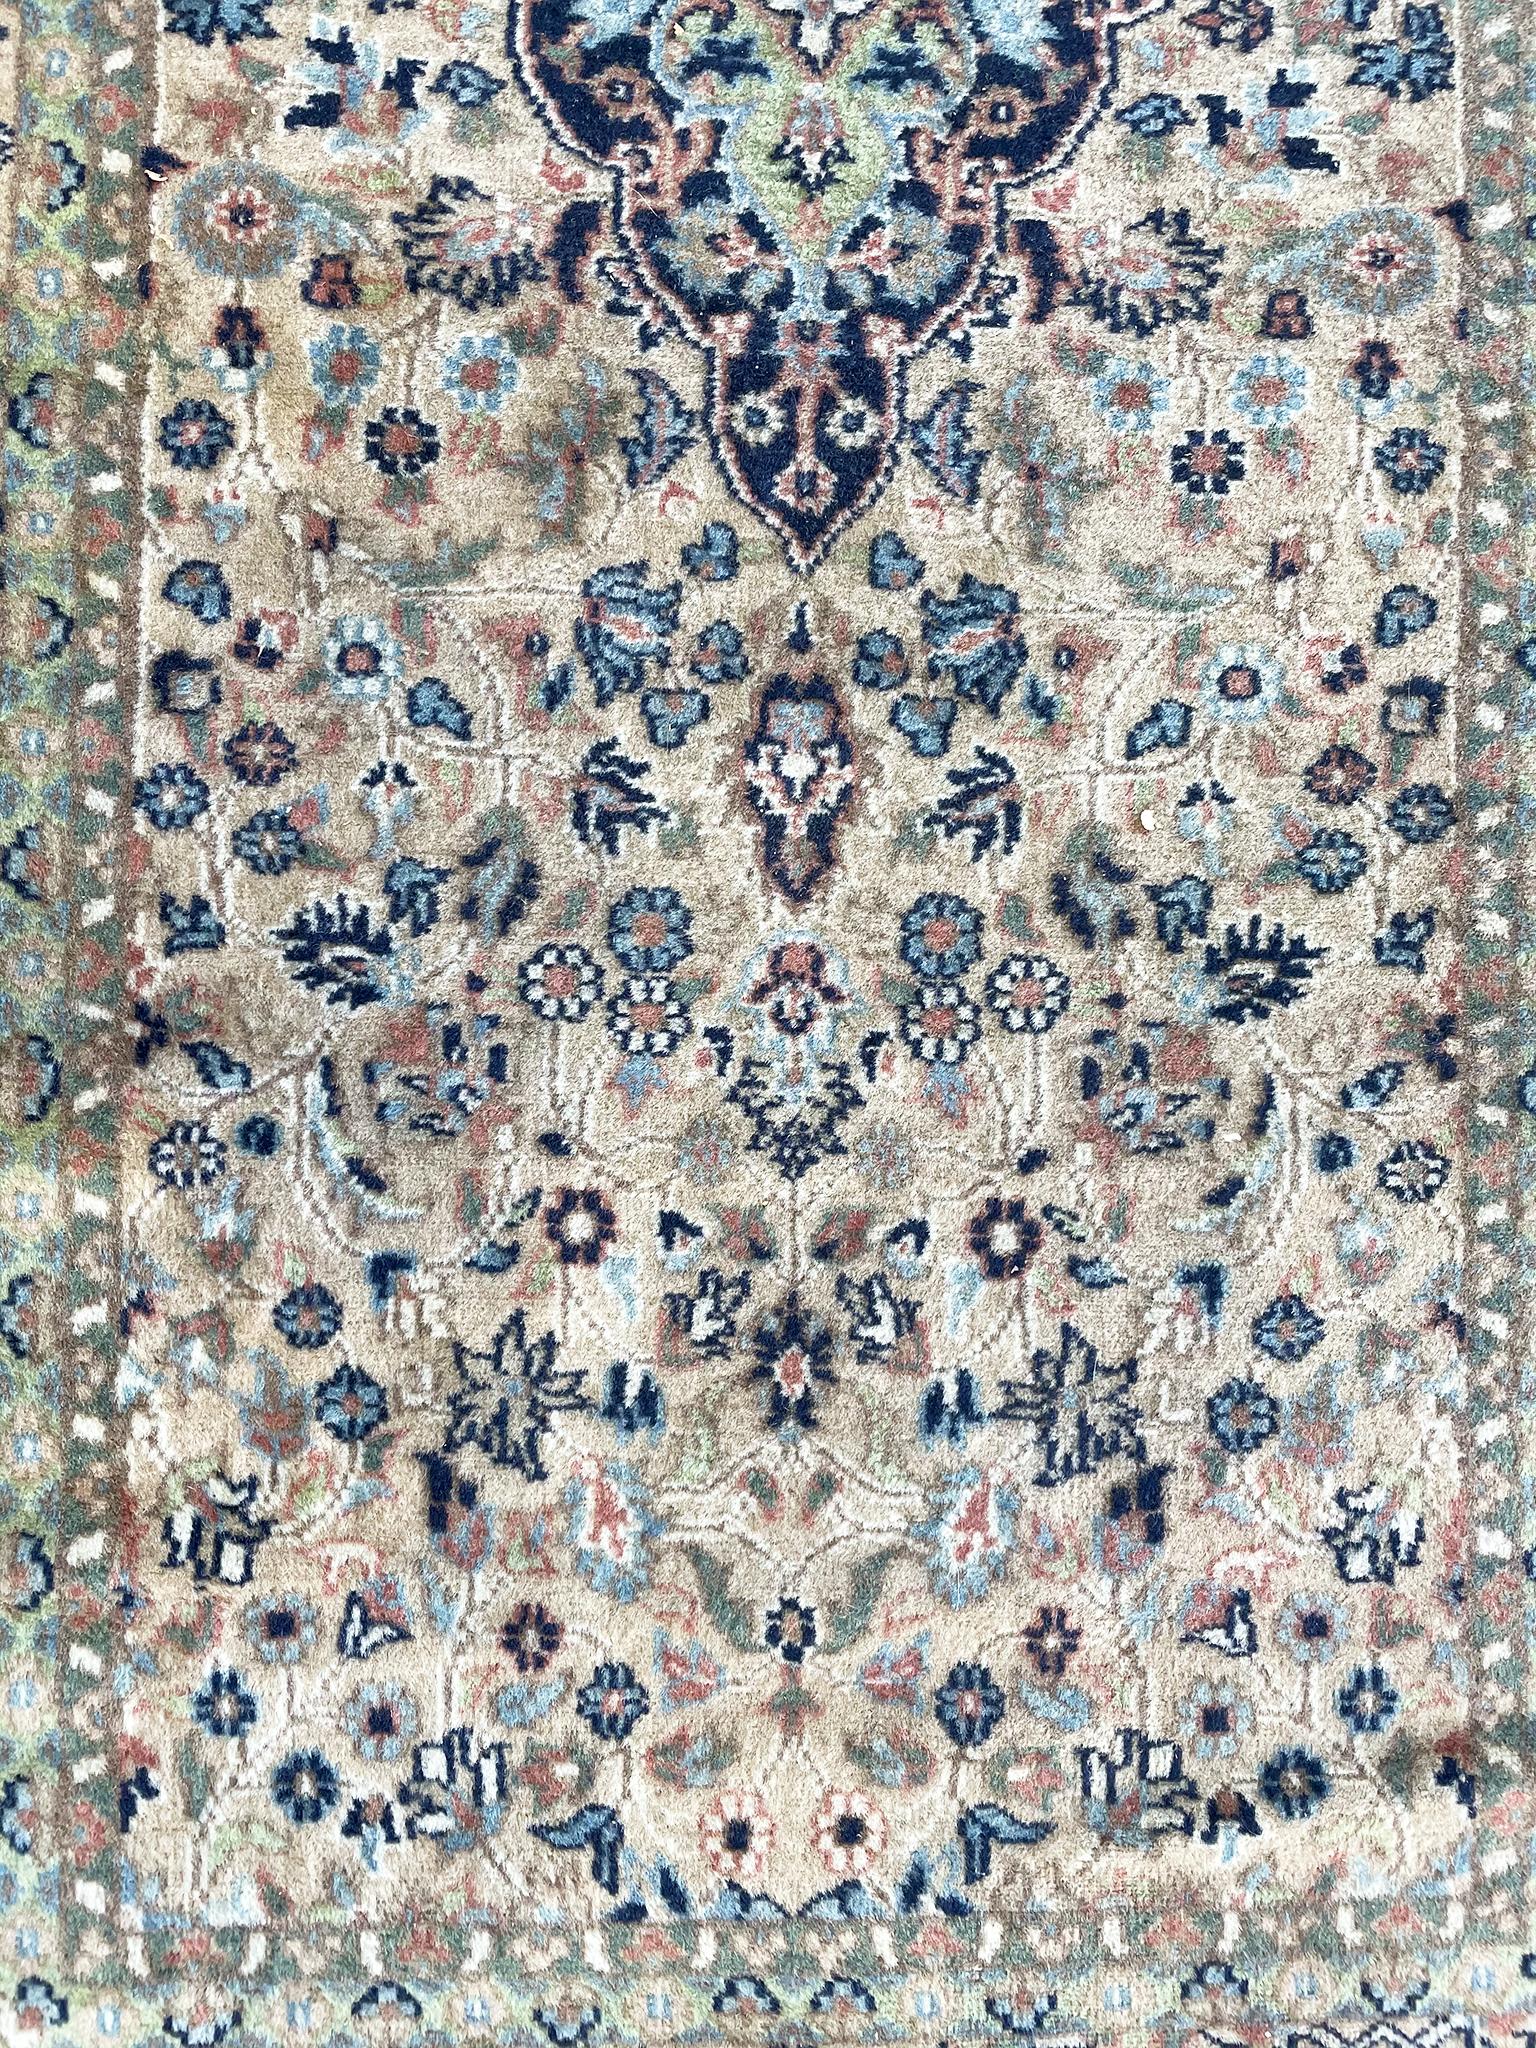 Wool Antique Early 20th Century Turkish Runner Rug